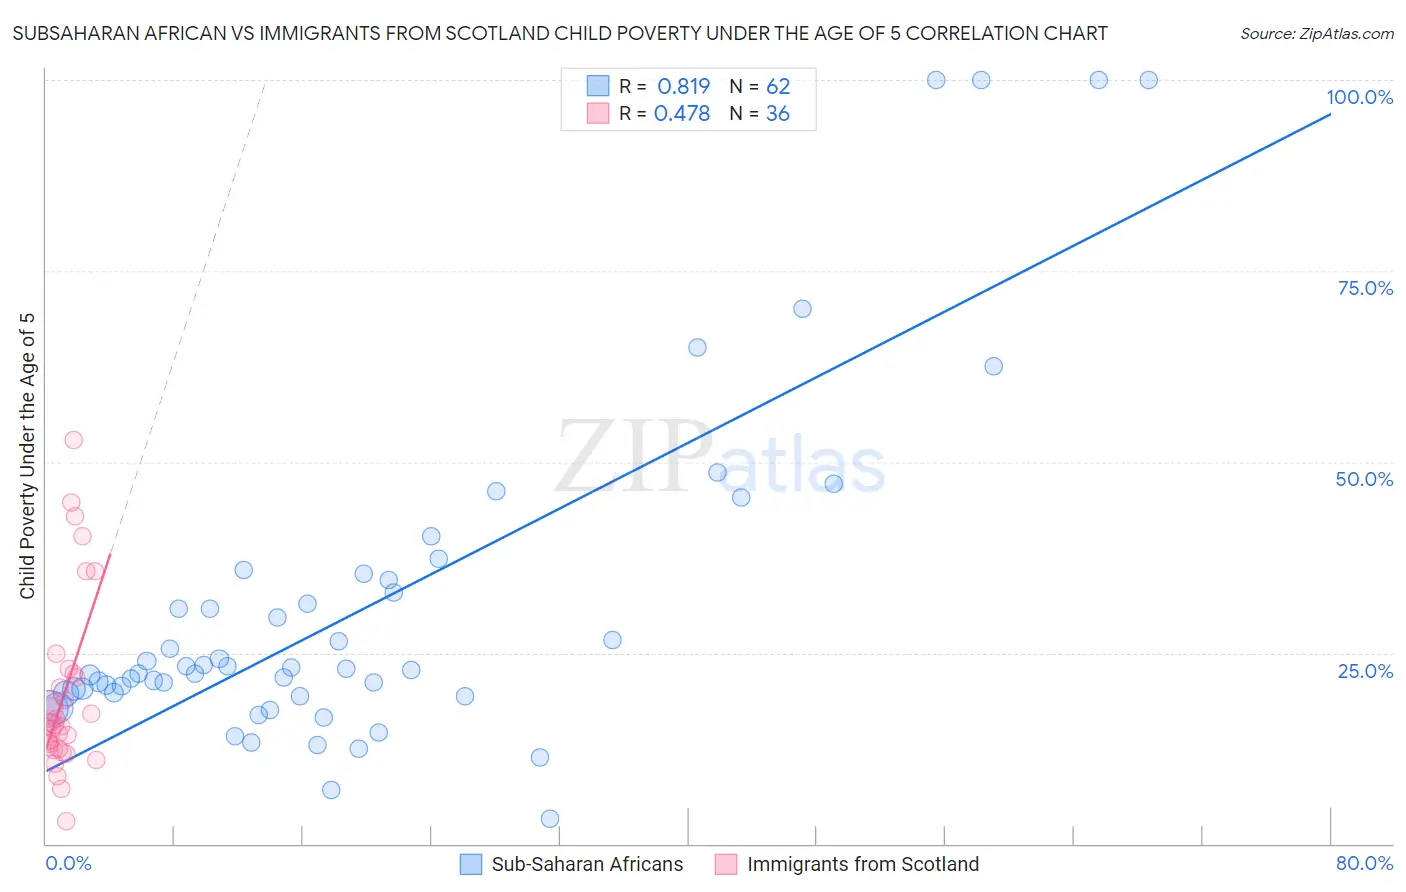 Subsaharan African vs Immigrants from Scotland Child Poverty Under the Age of 5